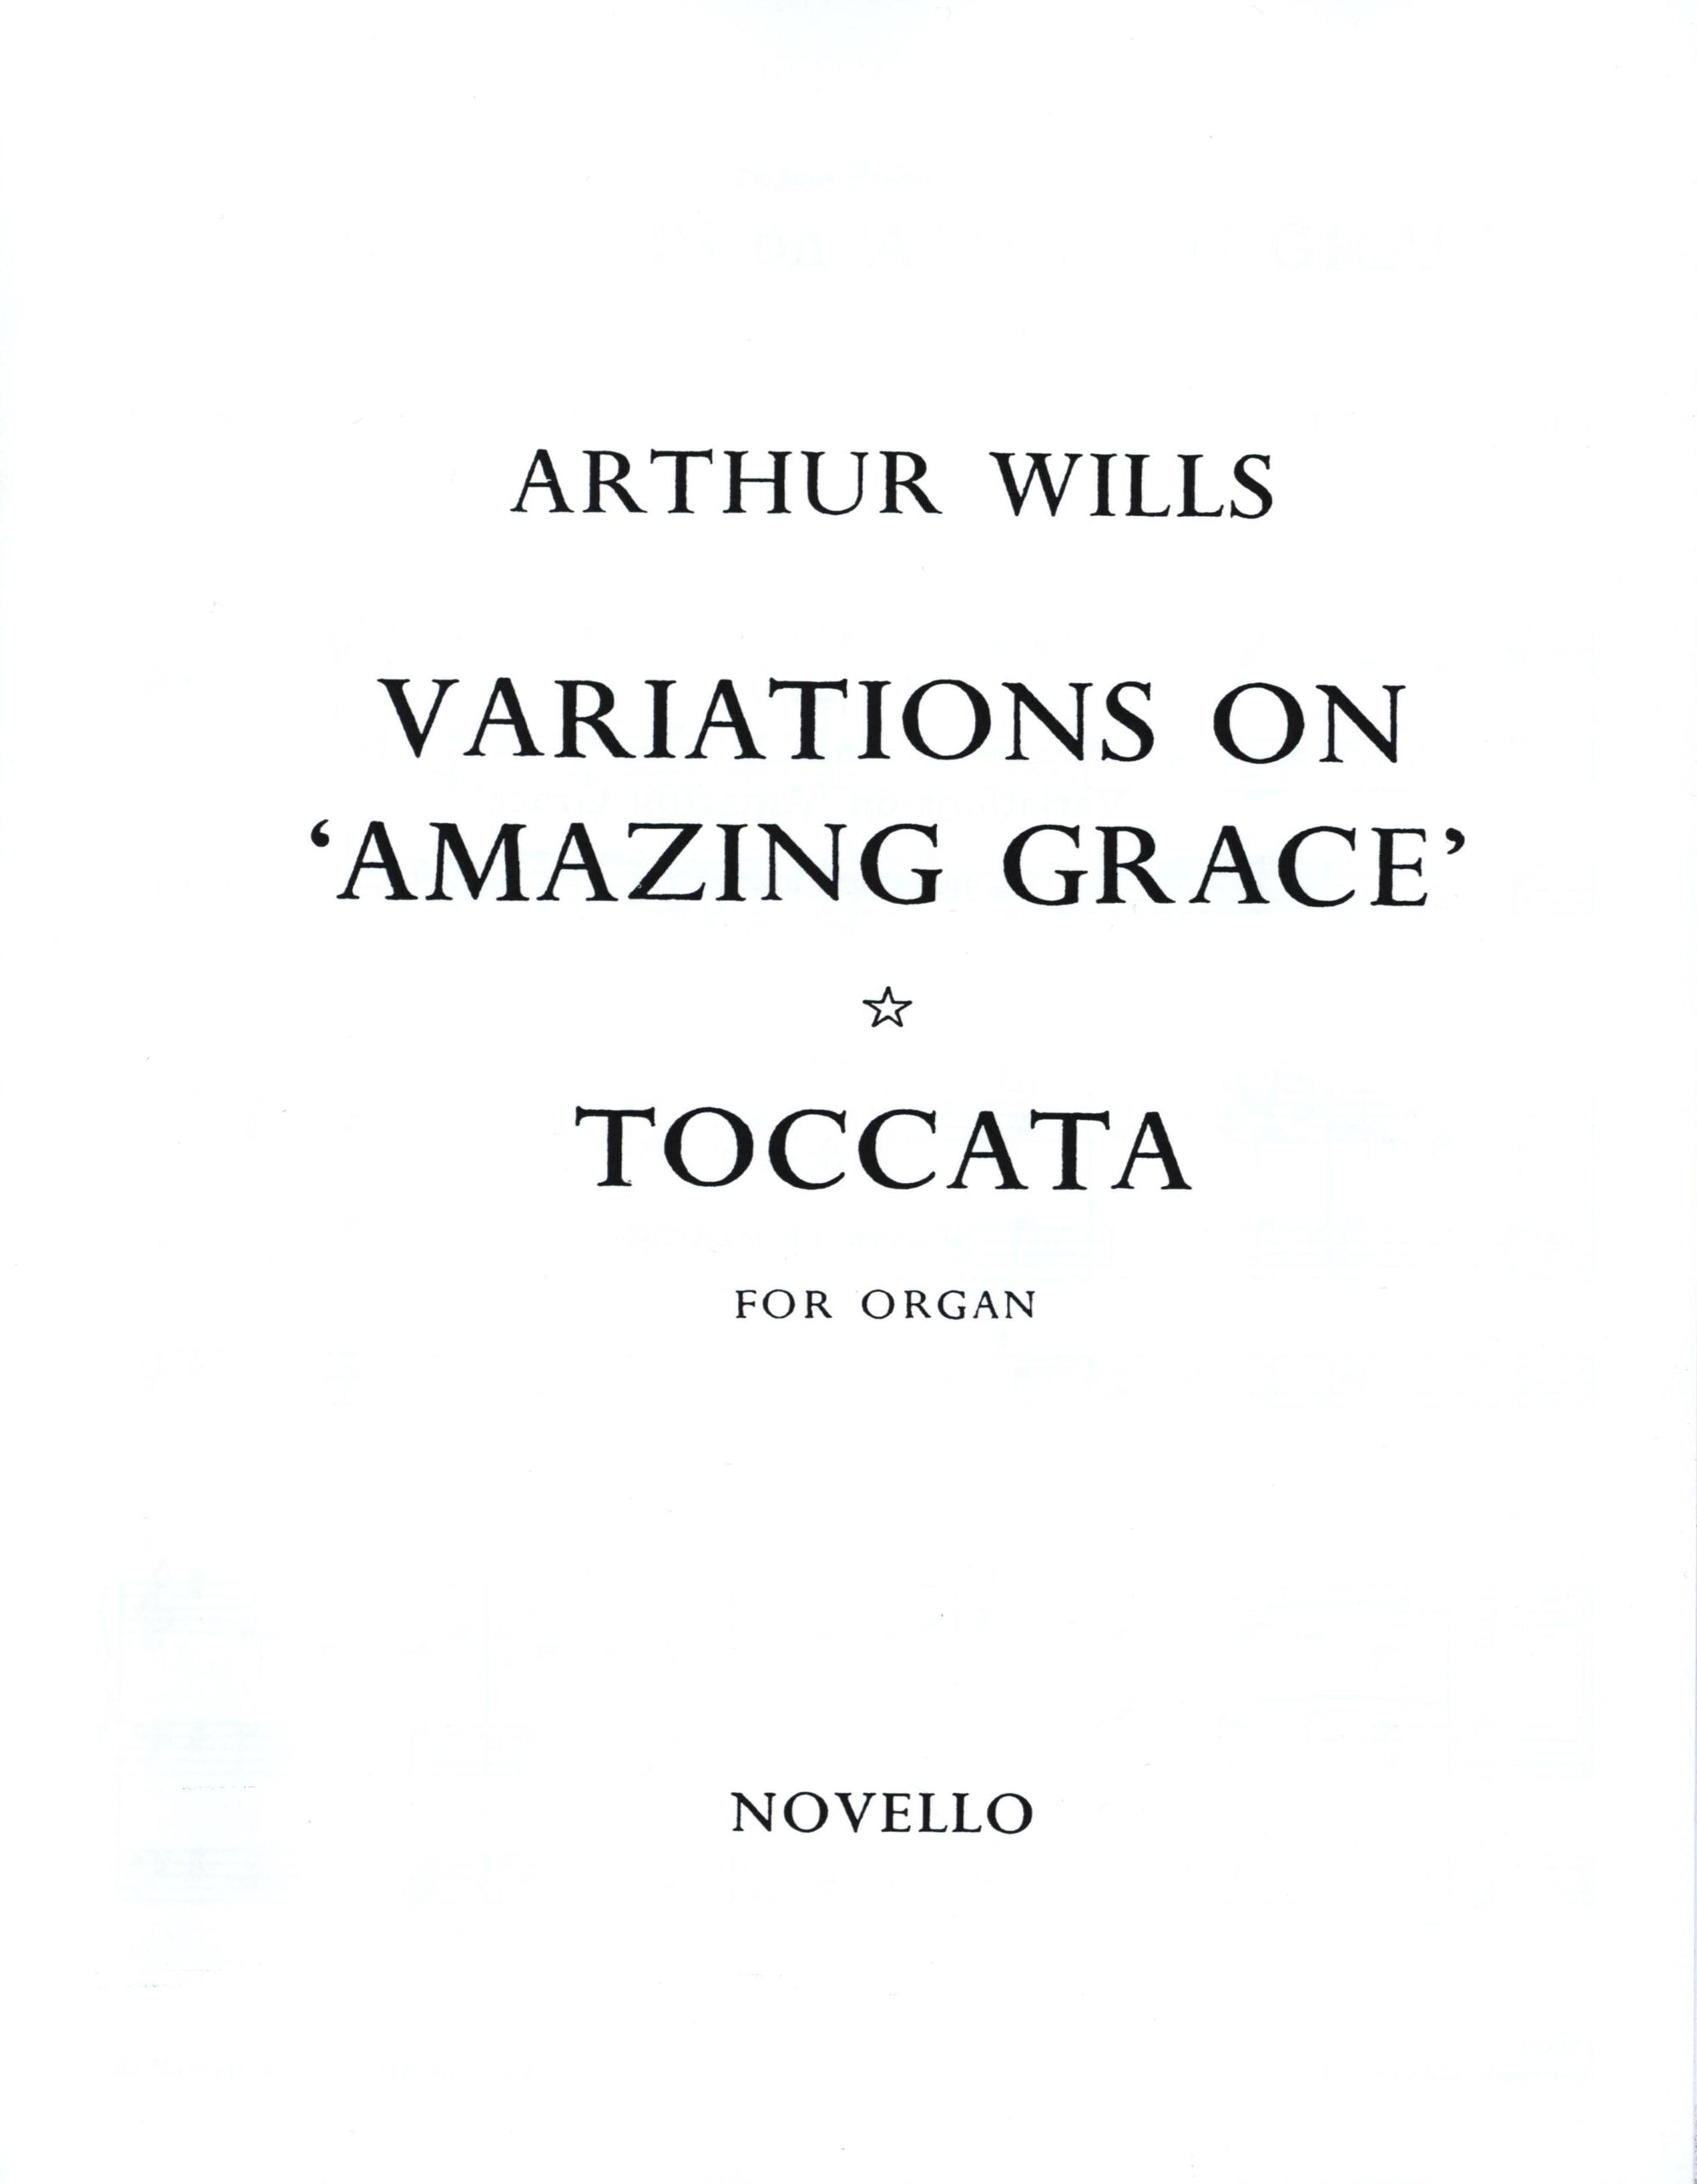 Wills: Variations on "Amazing Grace" & Toccata